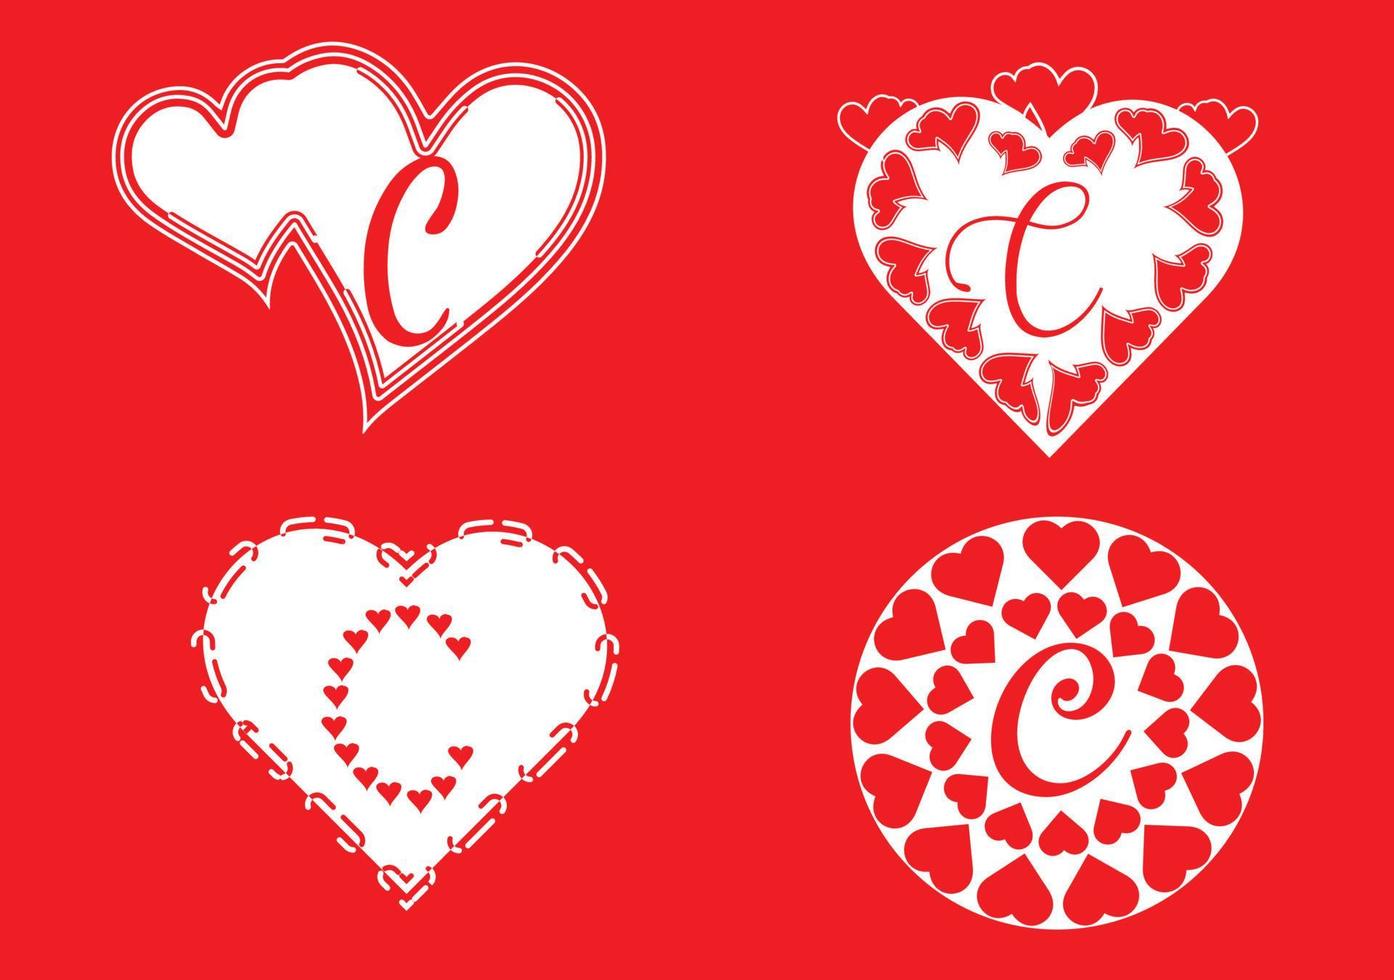 C letter logo with love icon, valentines day design template vector